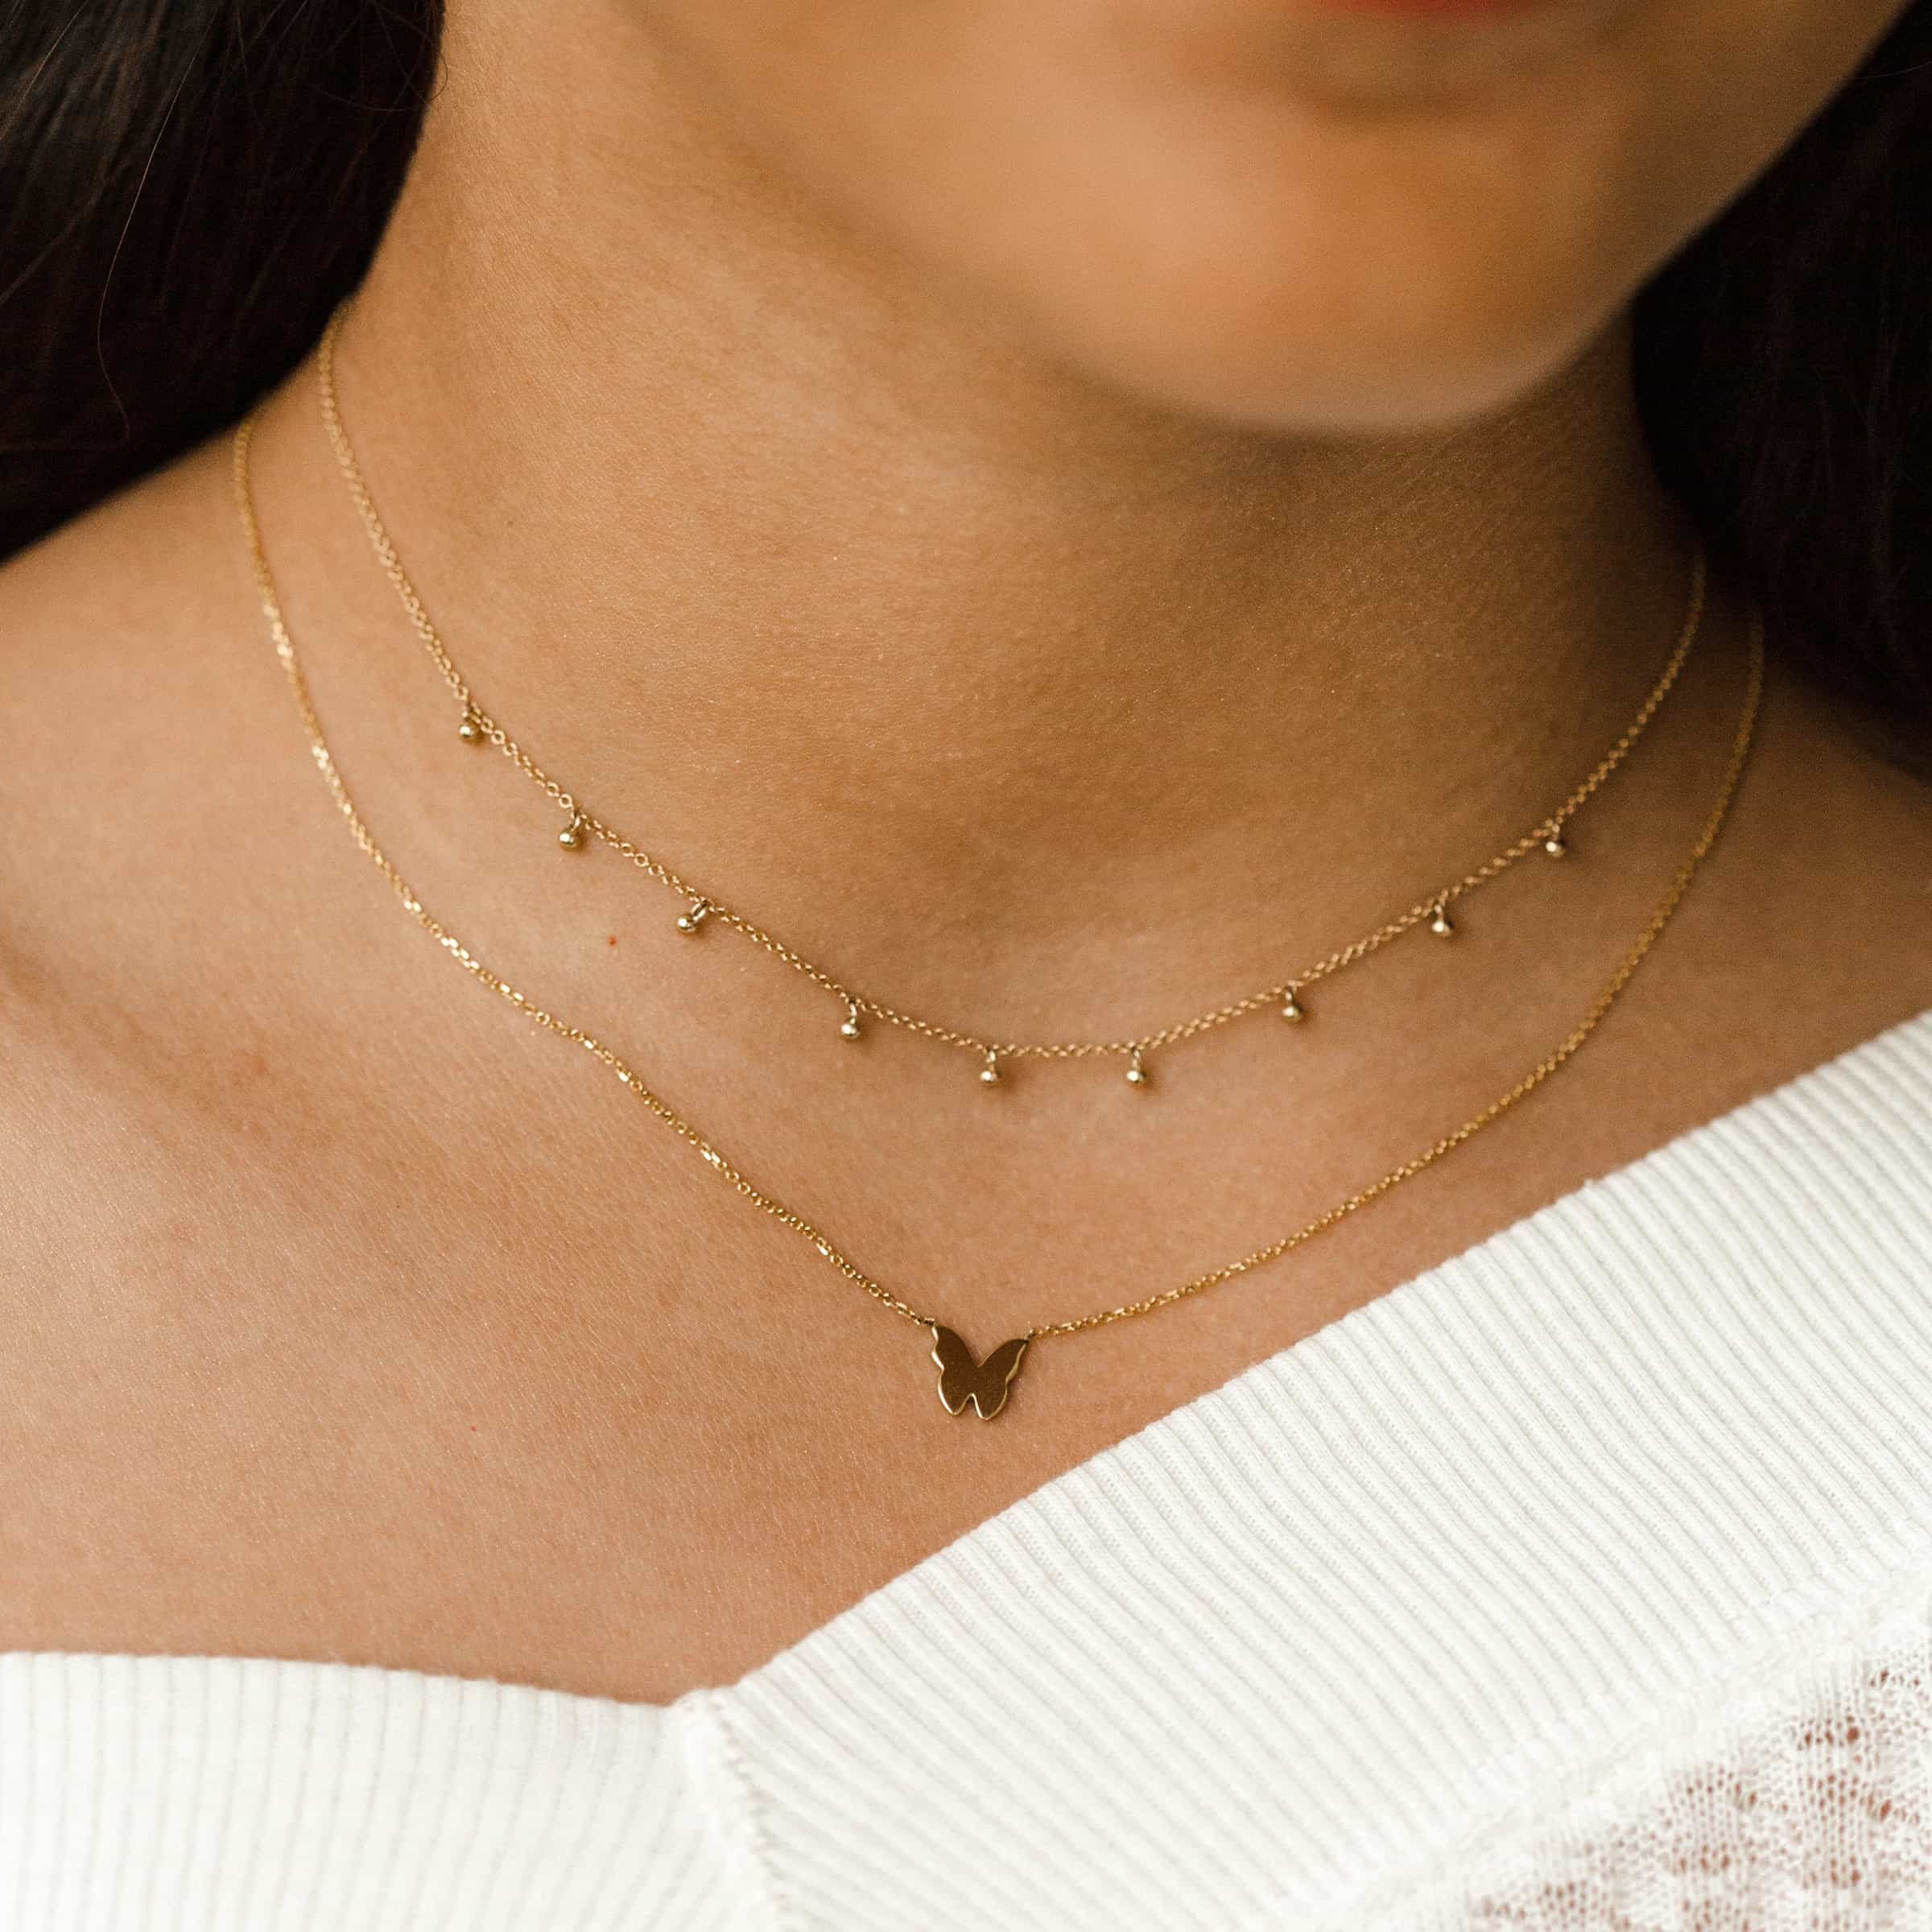 Mini Dainty Ball Chain Necklace 14K White Gold / 18 - 20 Adjustable by Baby Gold - Shop Custom Gold Jewelry